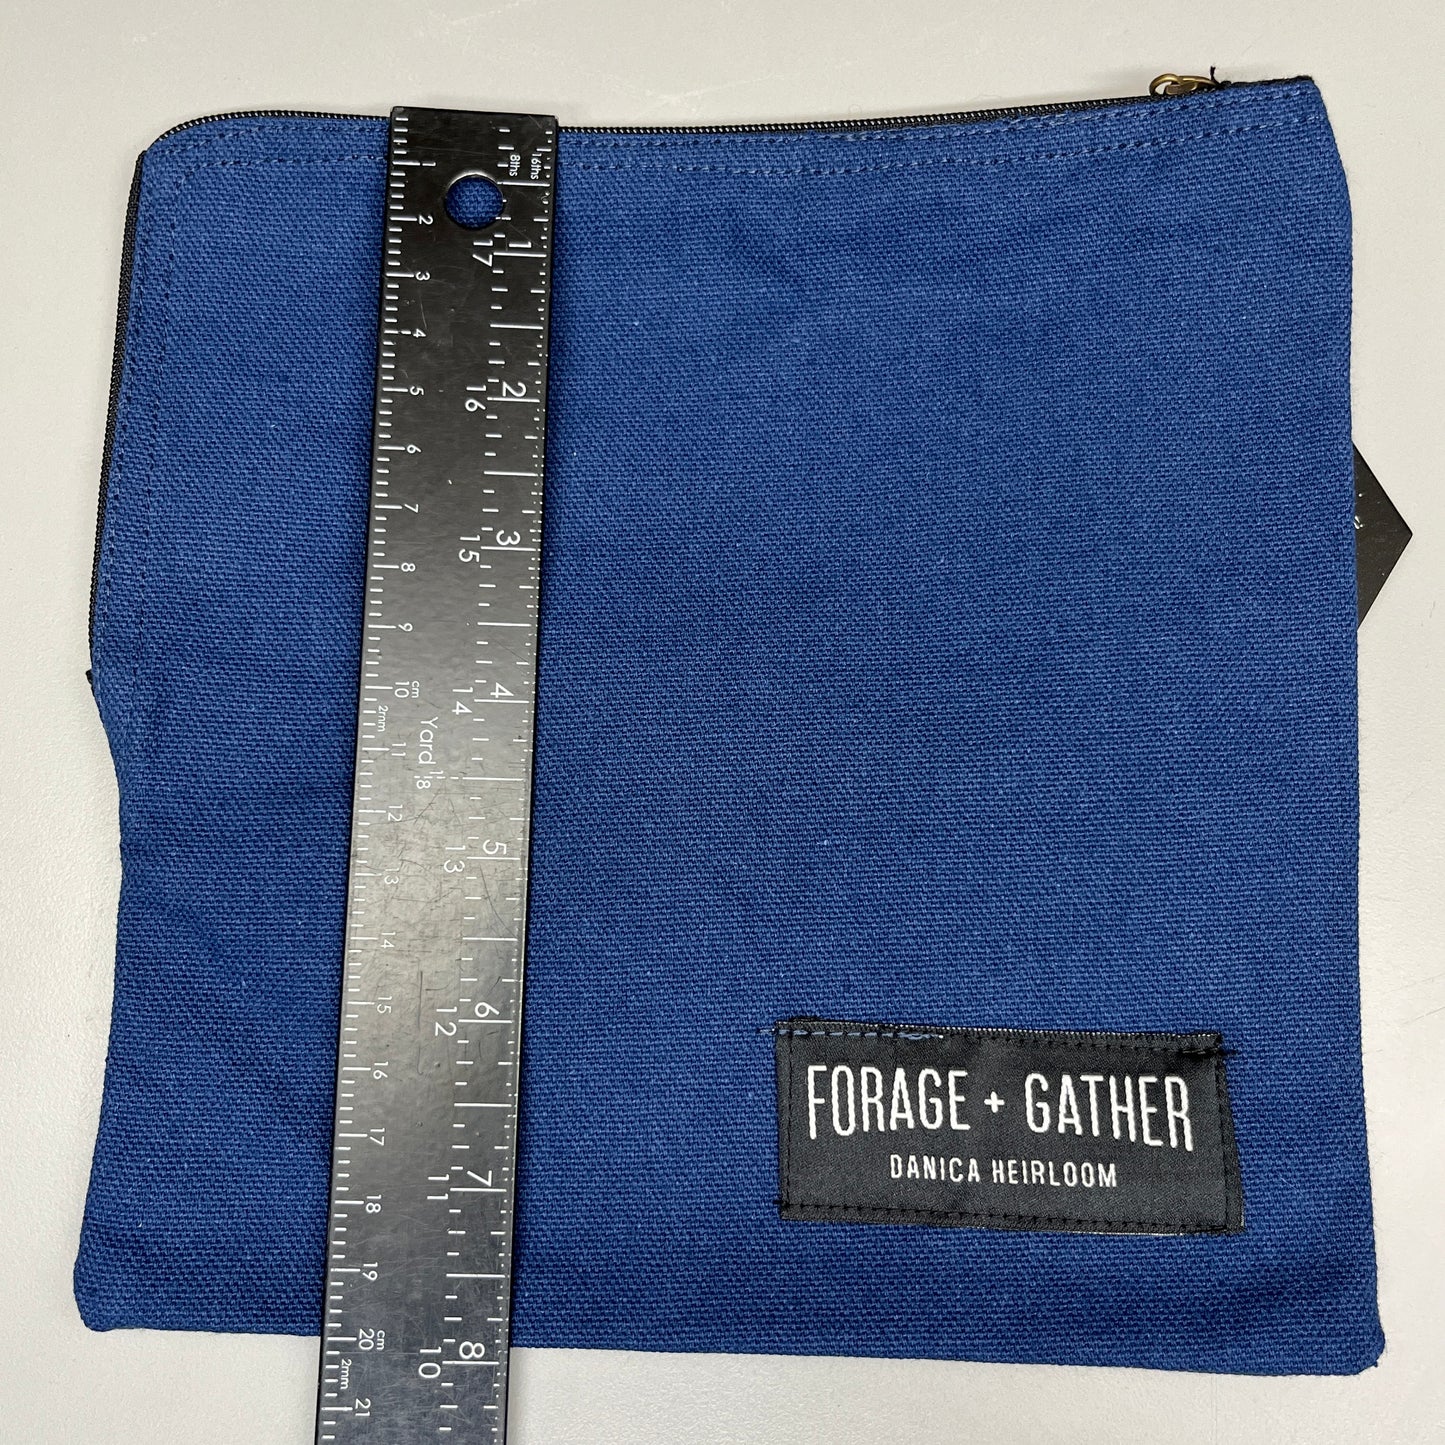 DANICA HEIRLOOM 3-PACK! Forge + Gather Snack Bag 8" x 8.5"  Navy Blue 3027003 (New)